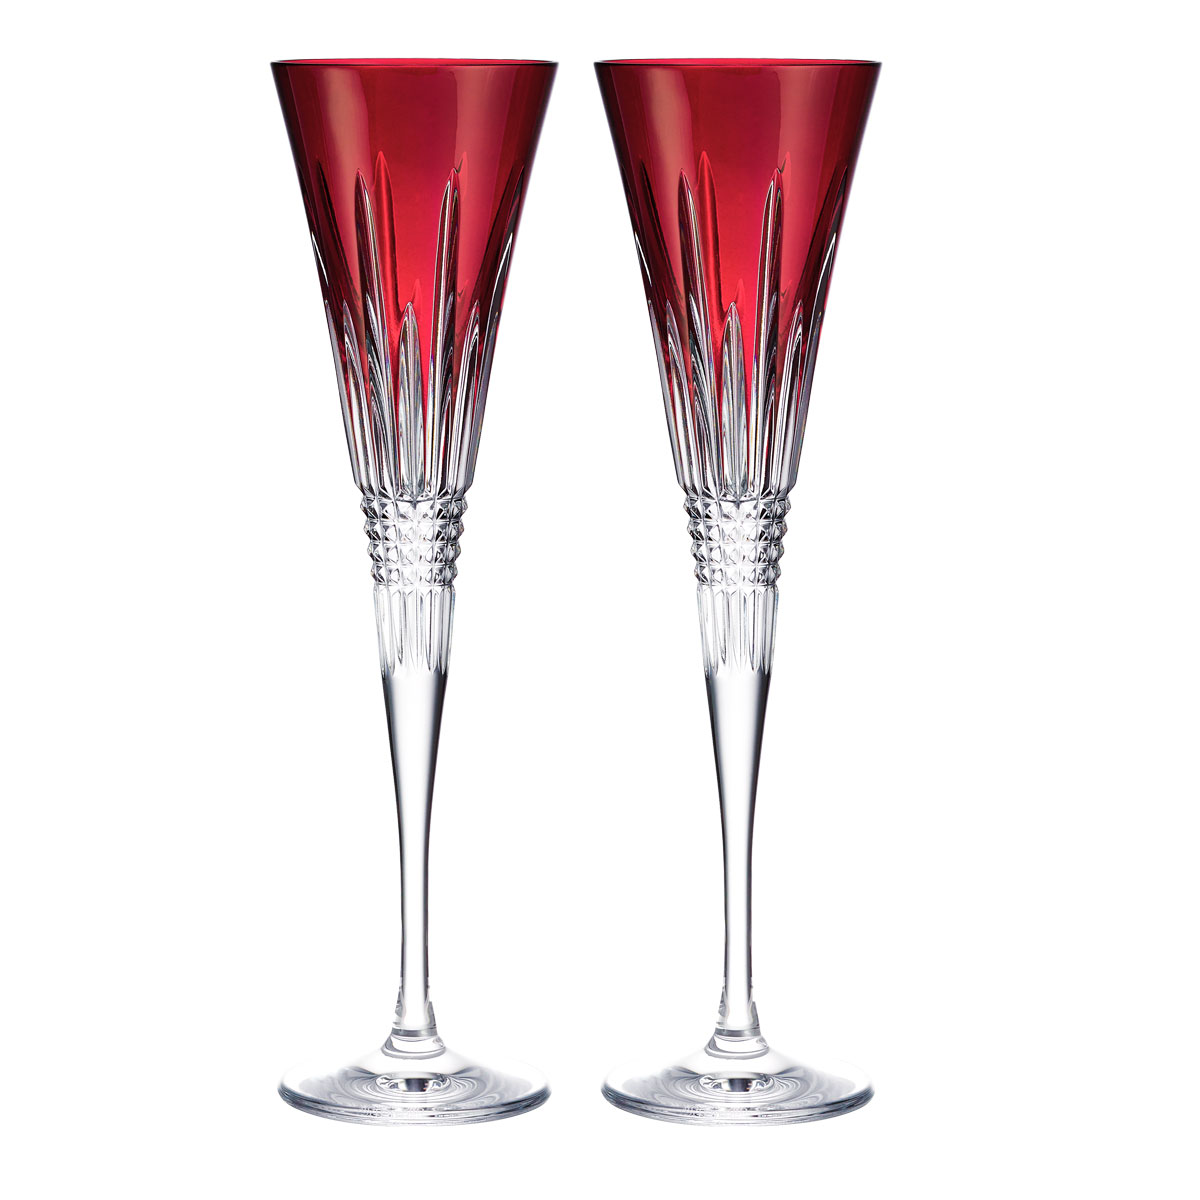 Waterford New Year Celebration Flute Red Glasses, Pair